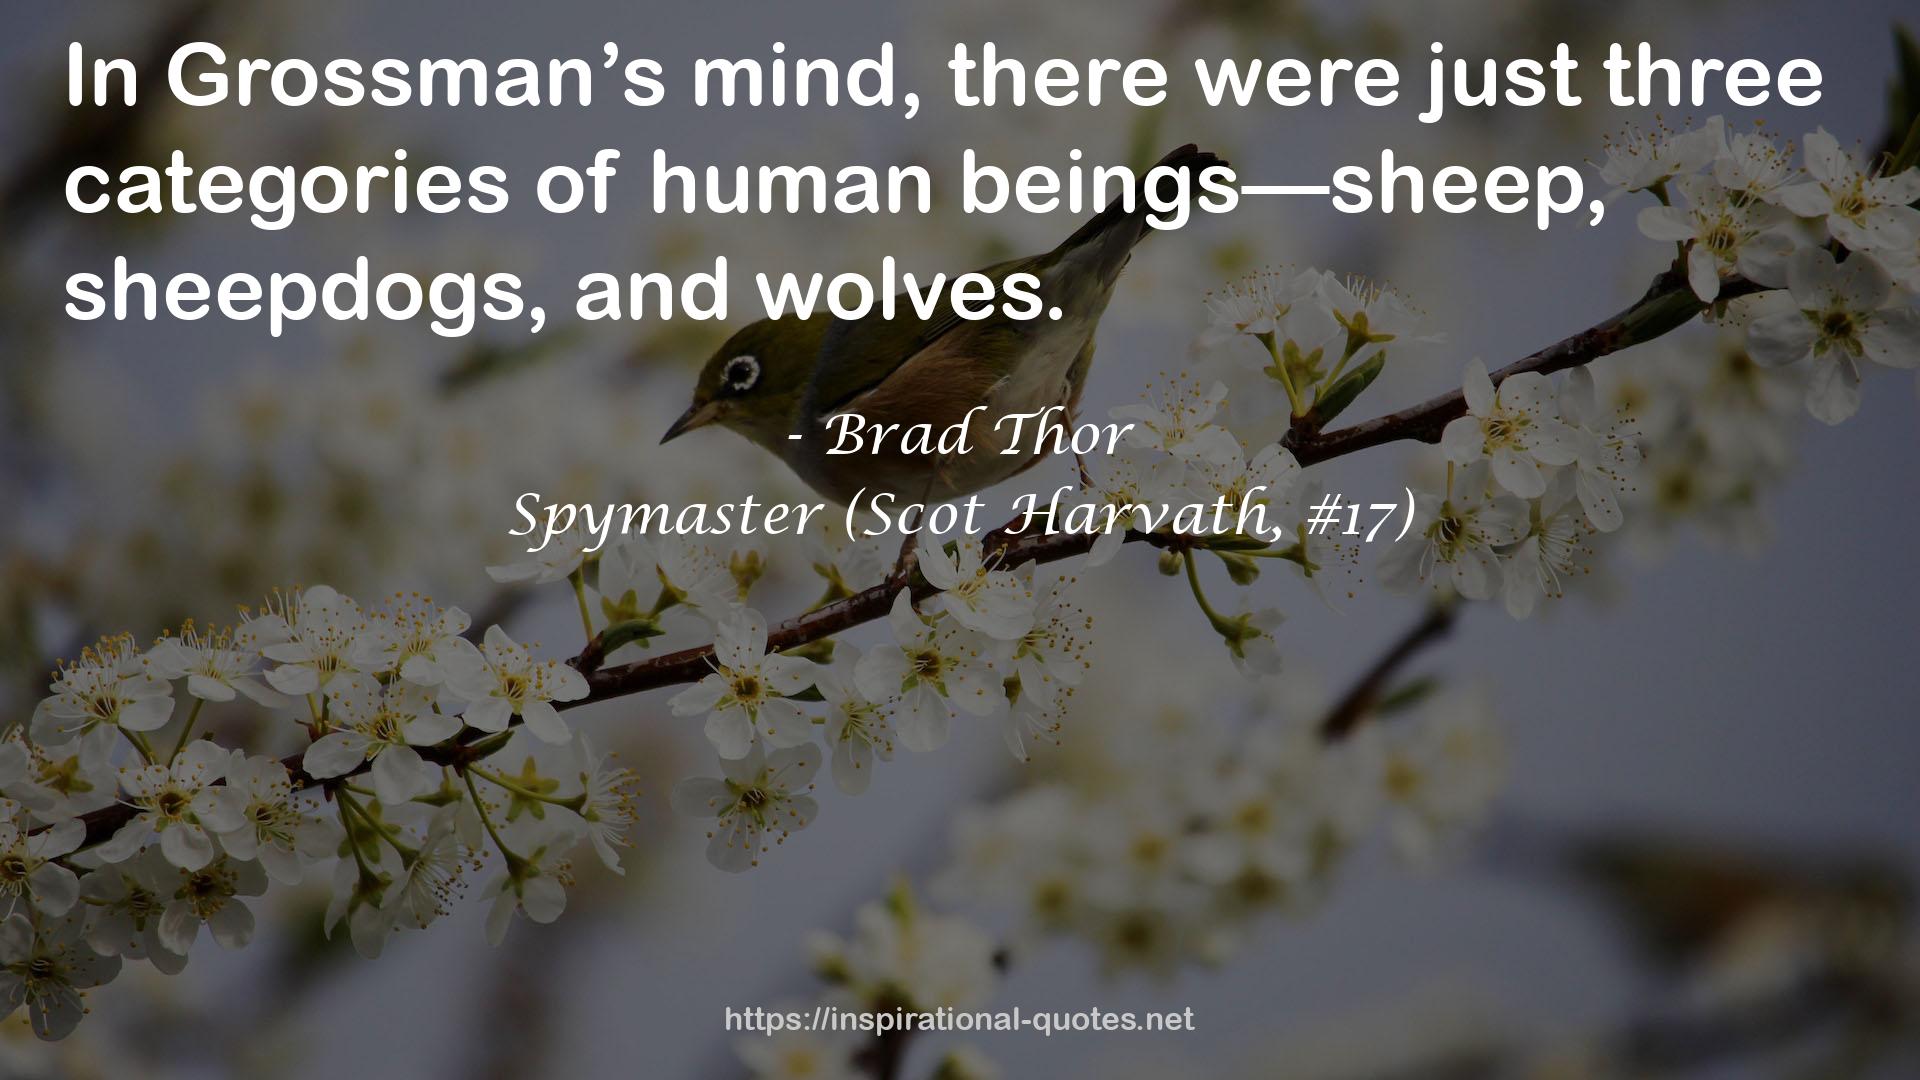 Spymaster (Scot Harvath, #17) QUOTES